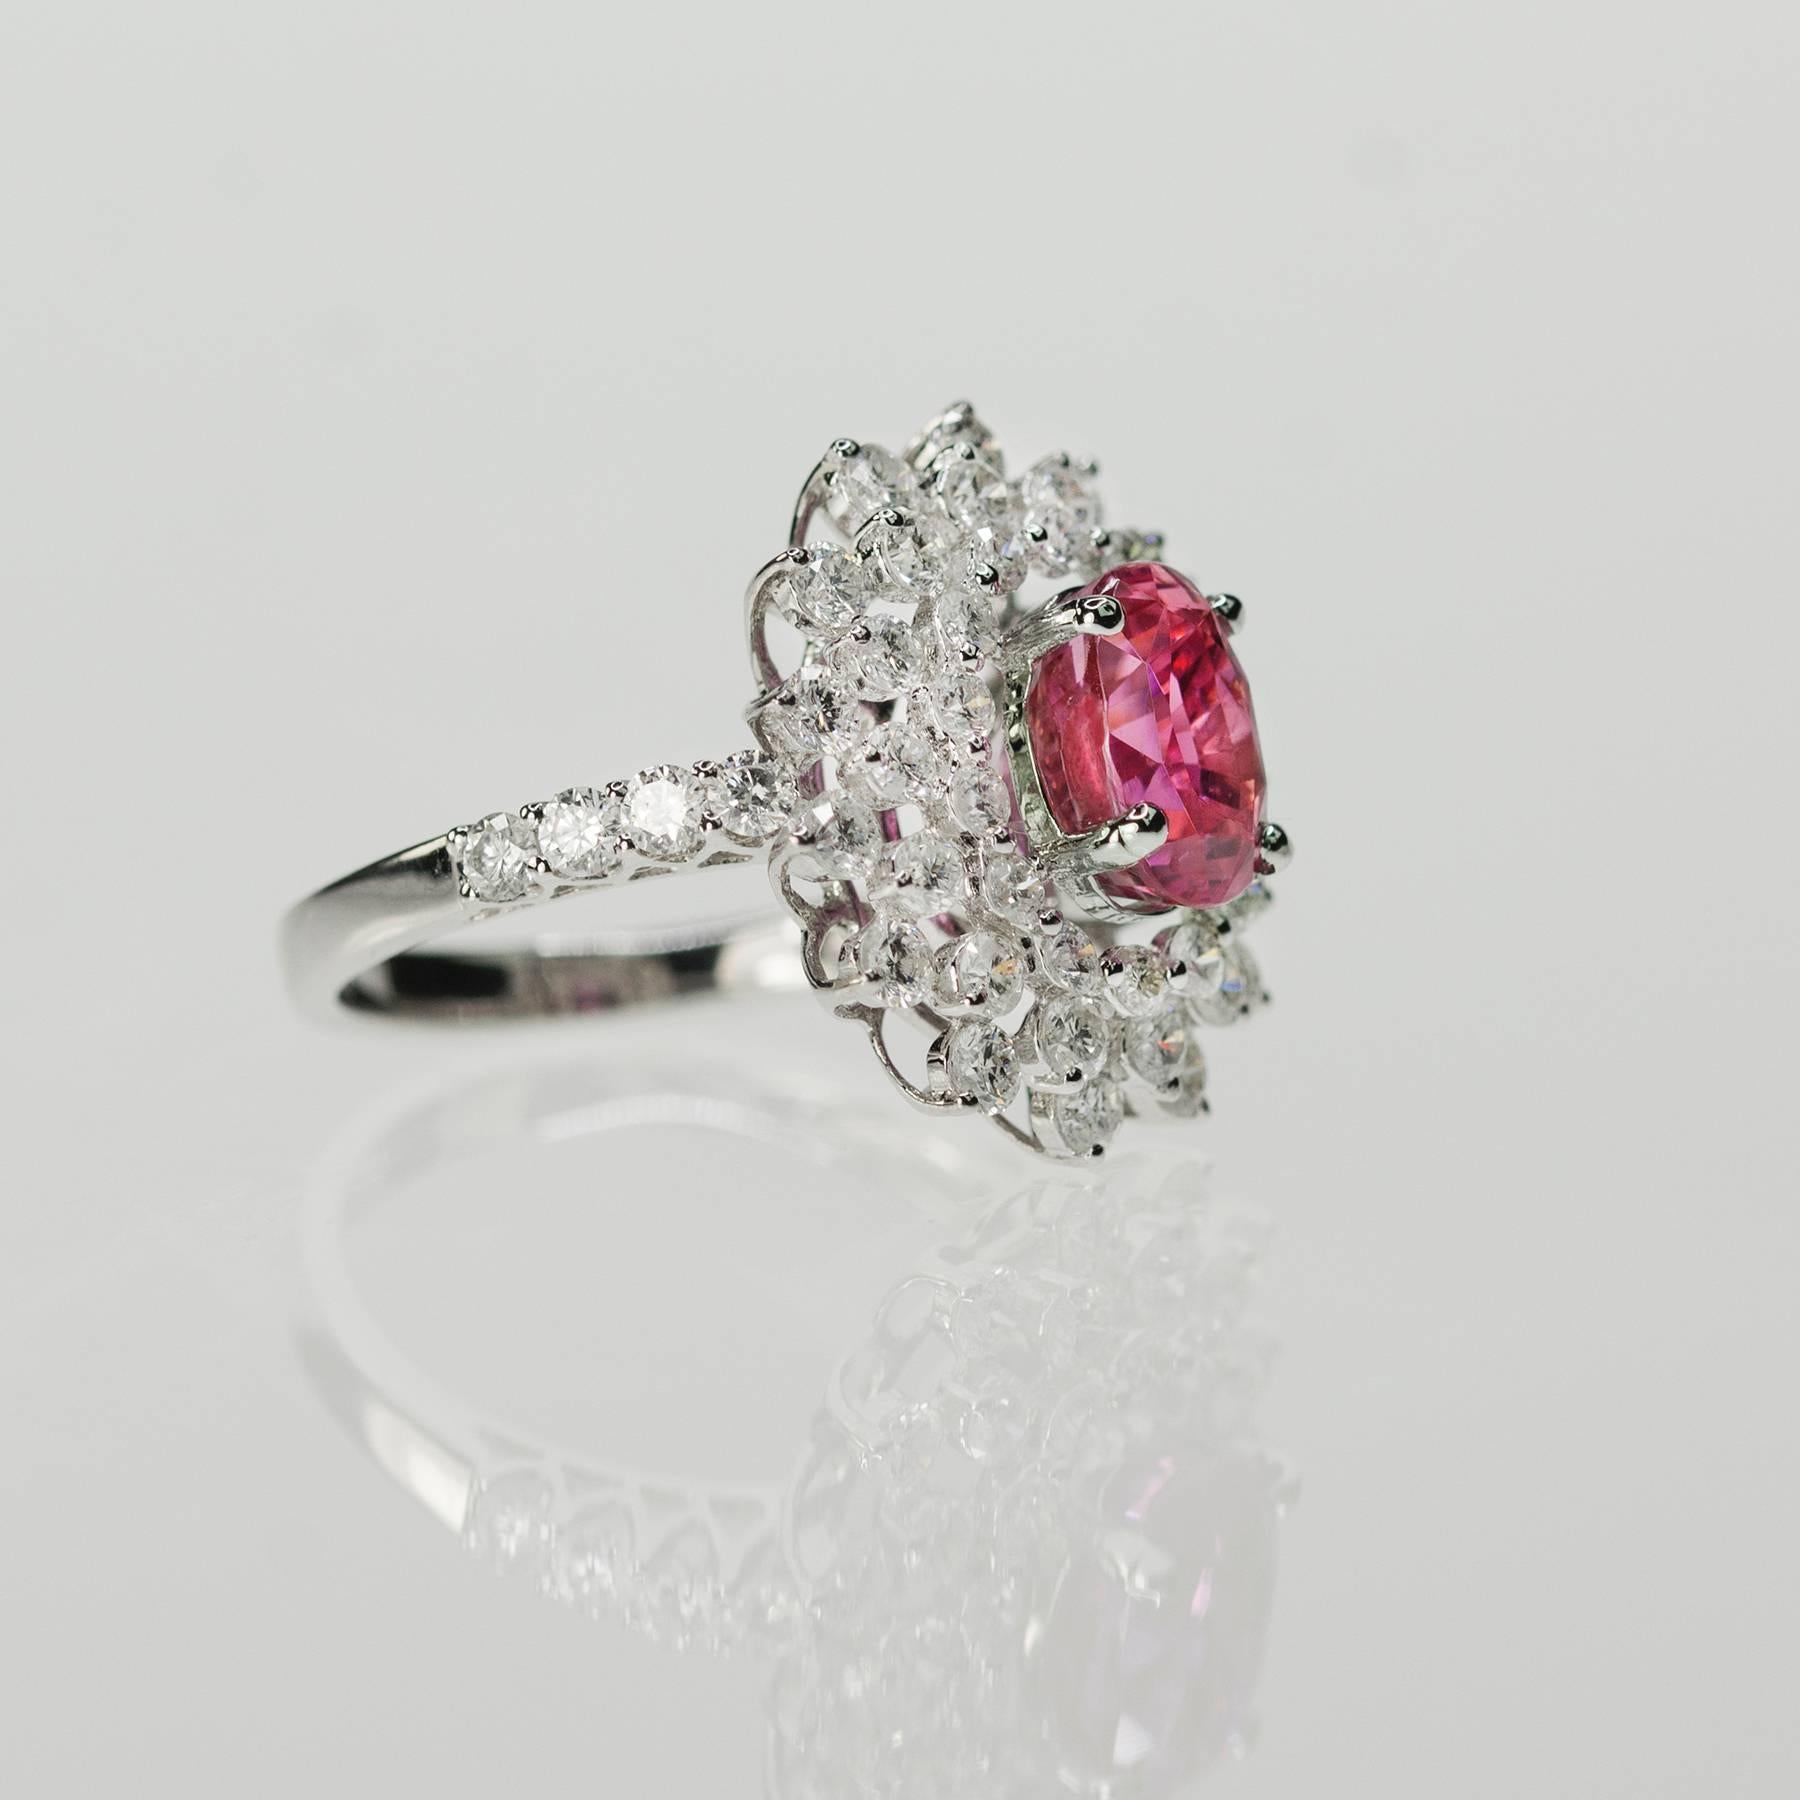 Stunning 18k gold ring with AGL certified 3.46 carat no heat natural Ceylon Pink Sapphire set with 52 round brilliant diamonds weighing 2.22 carats. Complimentary ring sizing included.